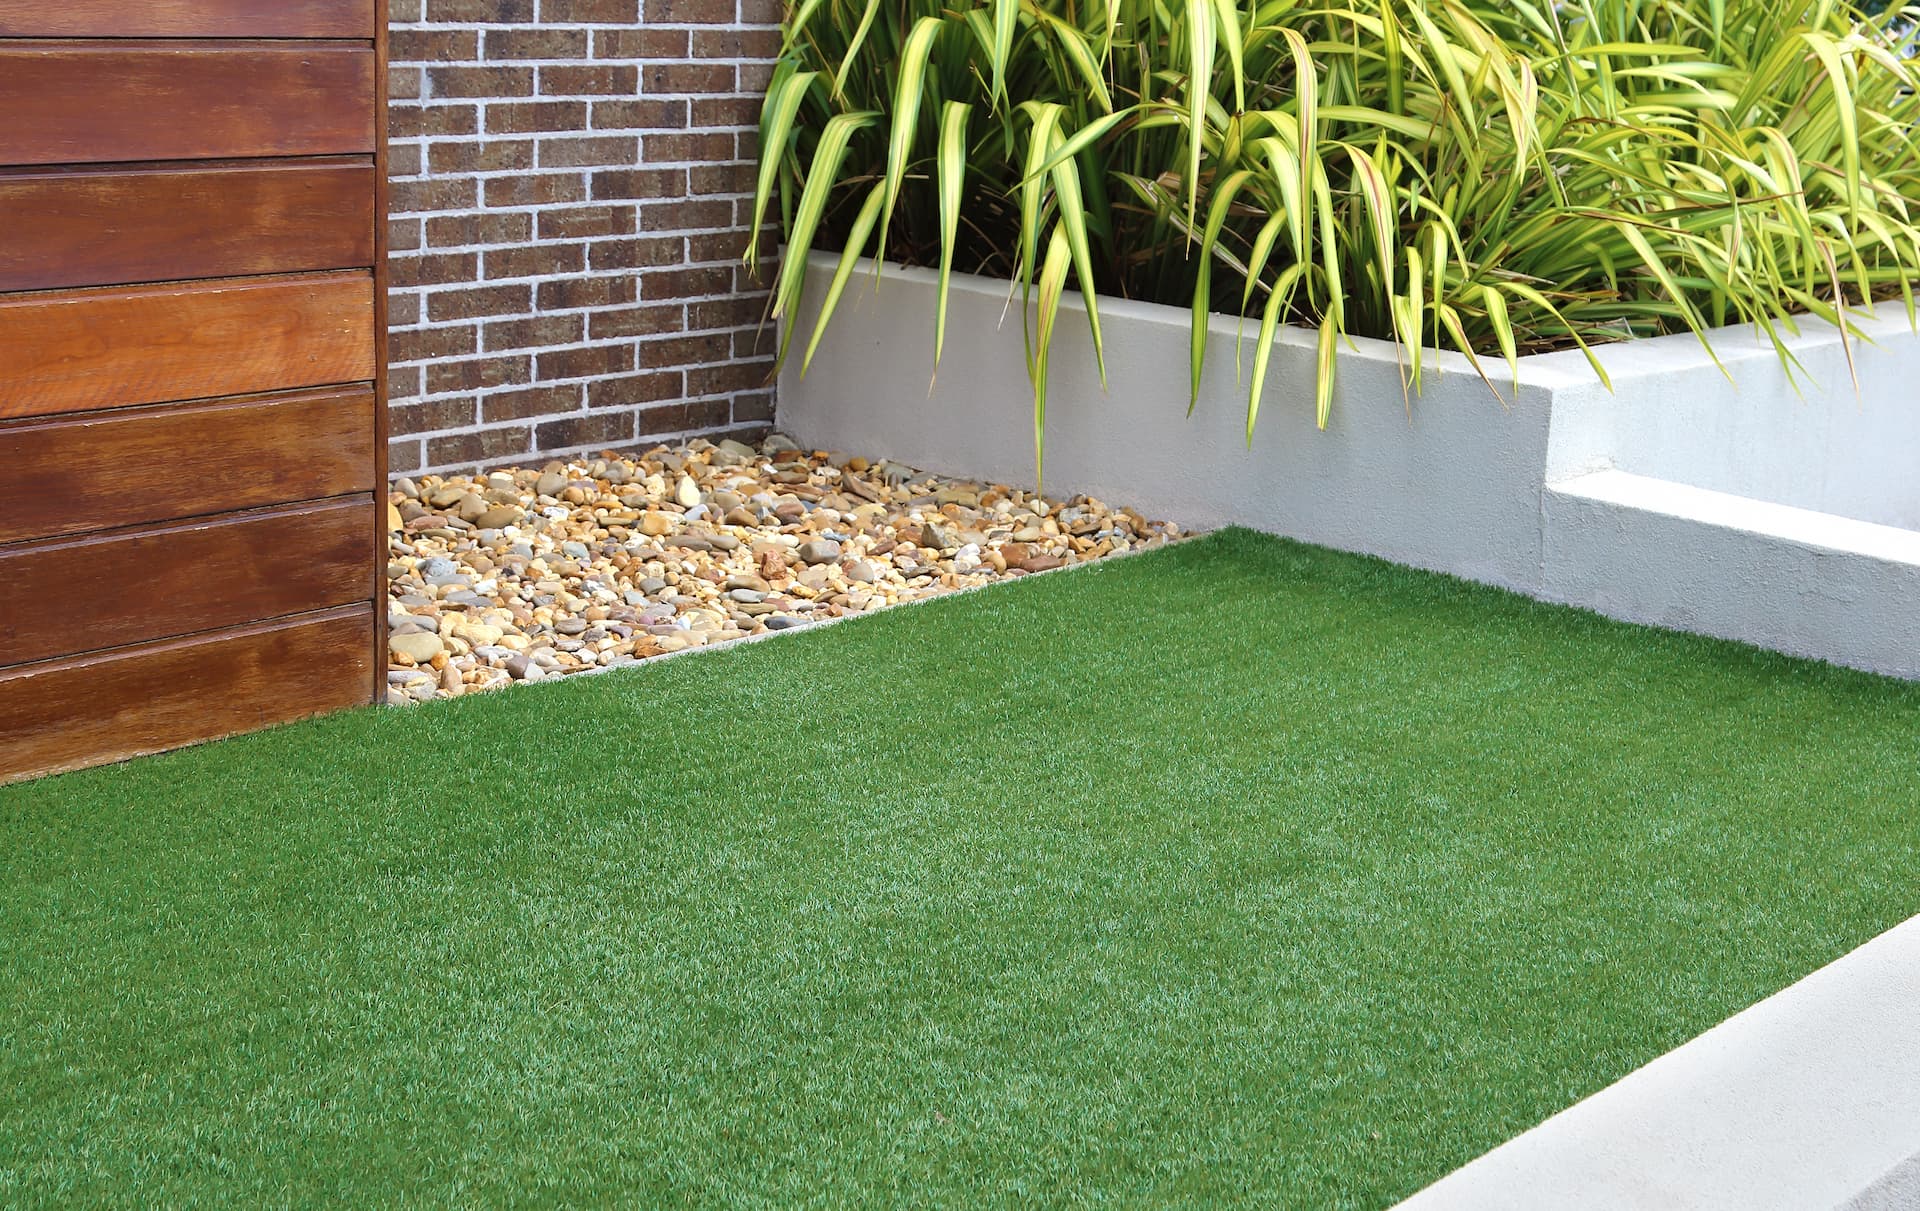 Licenced Artificial Grass & Turf services in Openshaw